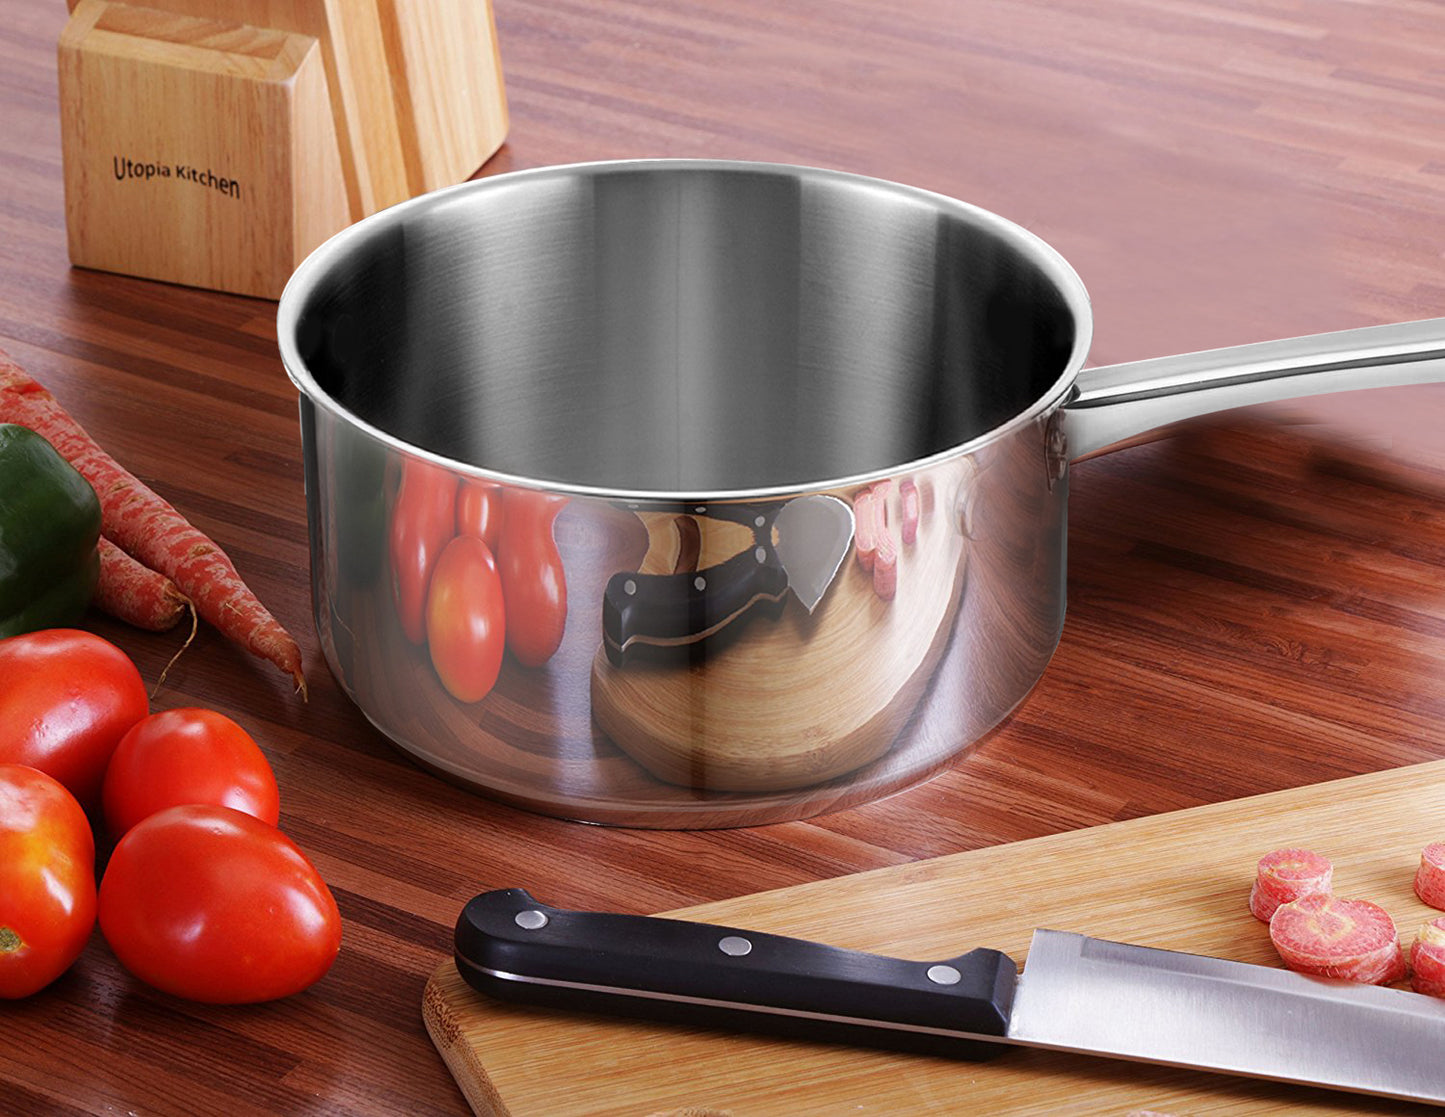 Cook N Home Saucepan Sauce Pot with Lid 2 Quart Stainless Steel , Stay